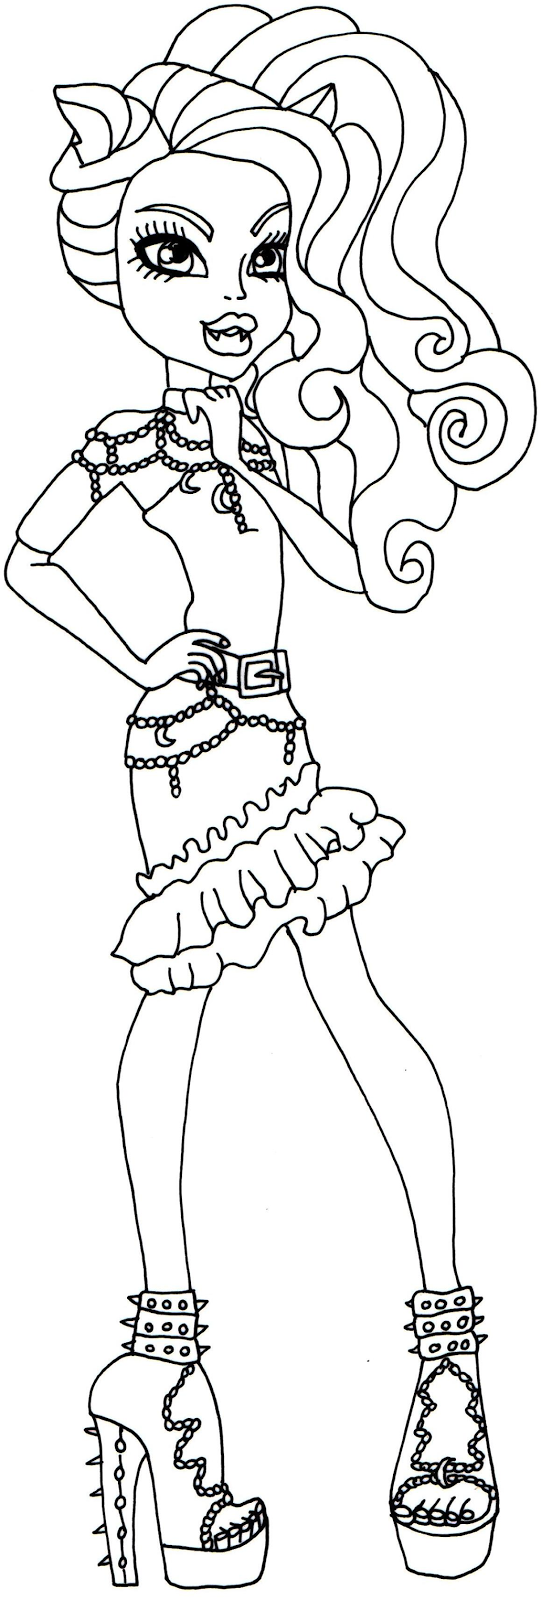 clawdeen wolf hauntlywood black carpet monster high on monster high printable coloring pages id=80002